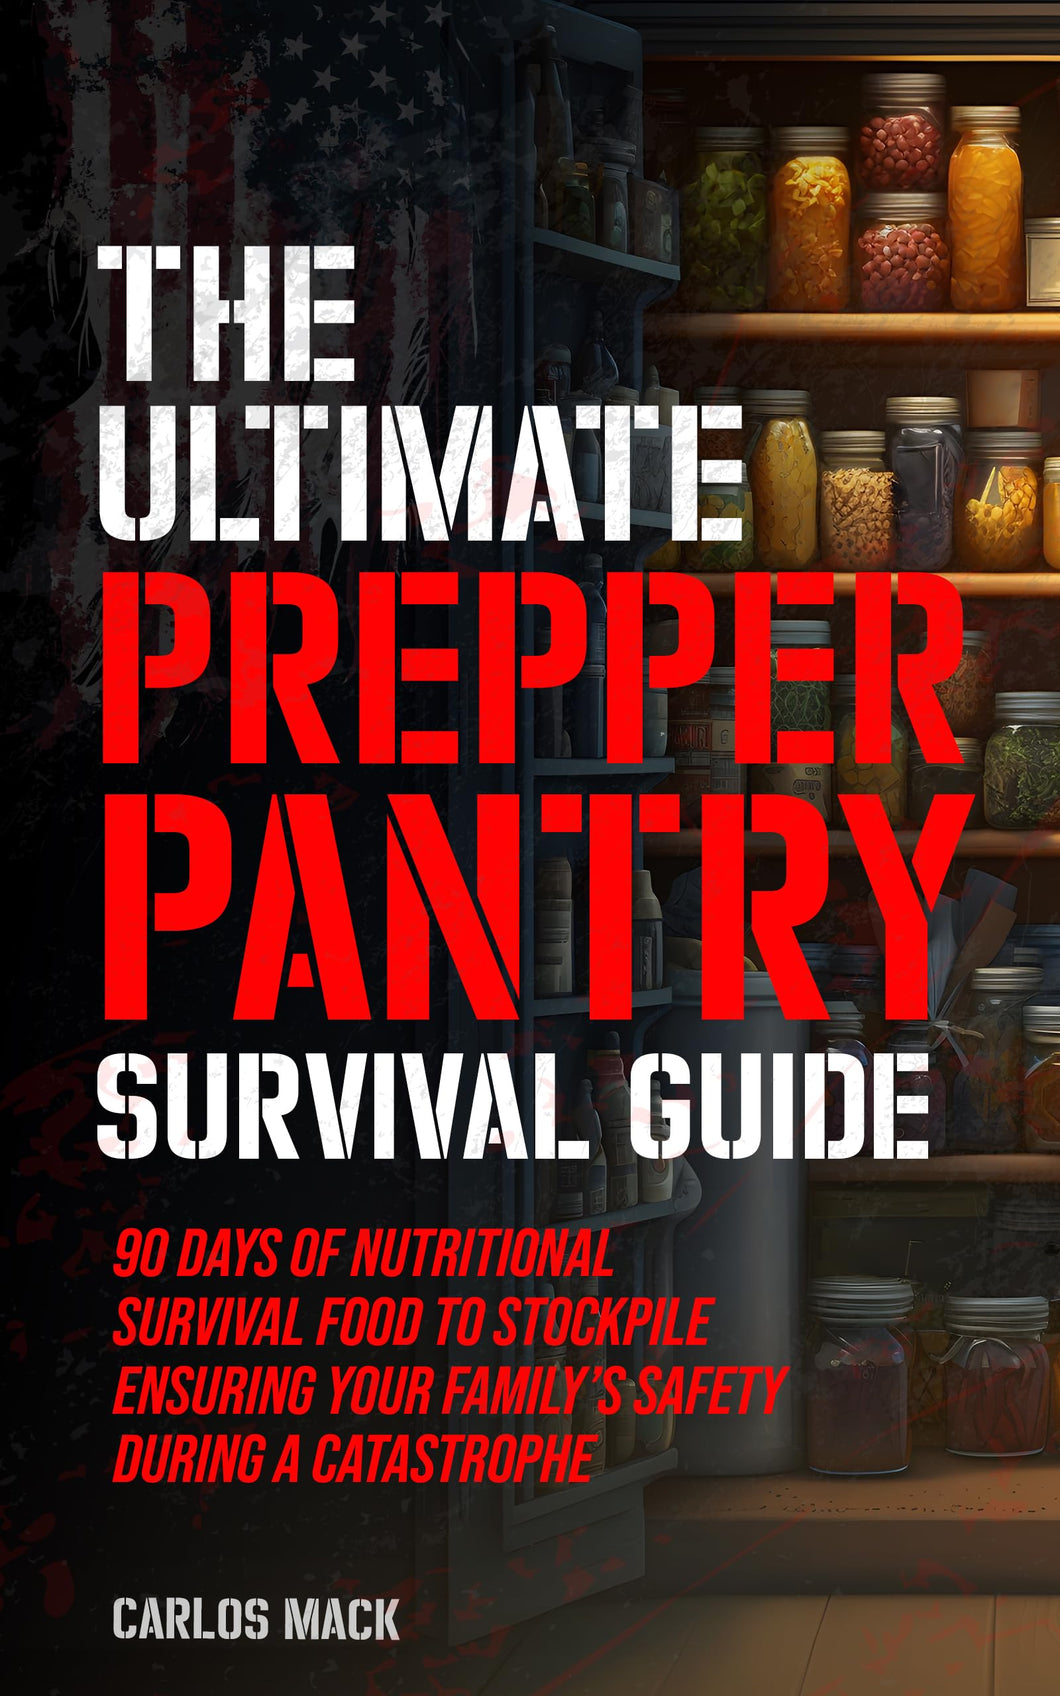 The Ultimate Prepper Pantry Survival Guide: 90 Days of Nutritional Survival Food to Stockpile Ensuring Your Family’s Safety During a Catastrophe